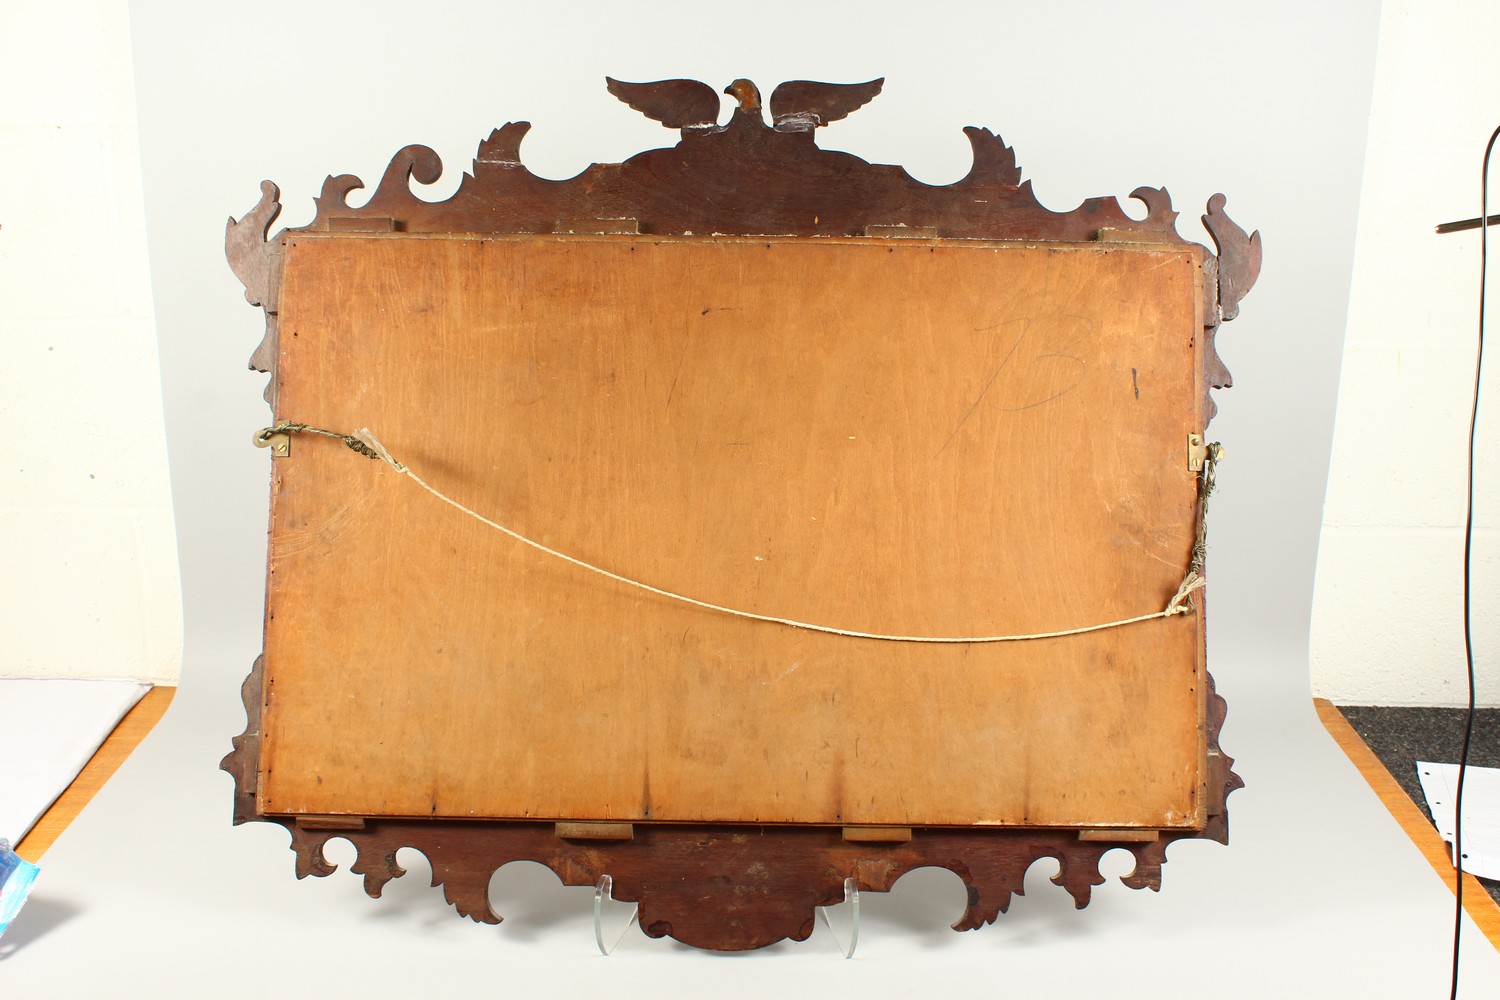 A GEORGIAN STYLE MAHOGANY FRETWORK FRAMED MIRROR, with shell inlay and eagle finial. 80cms high x - Image 11 of 14